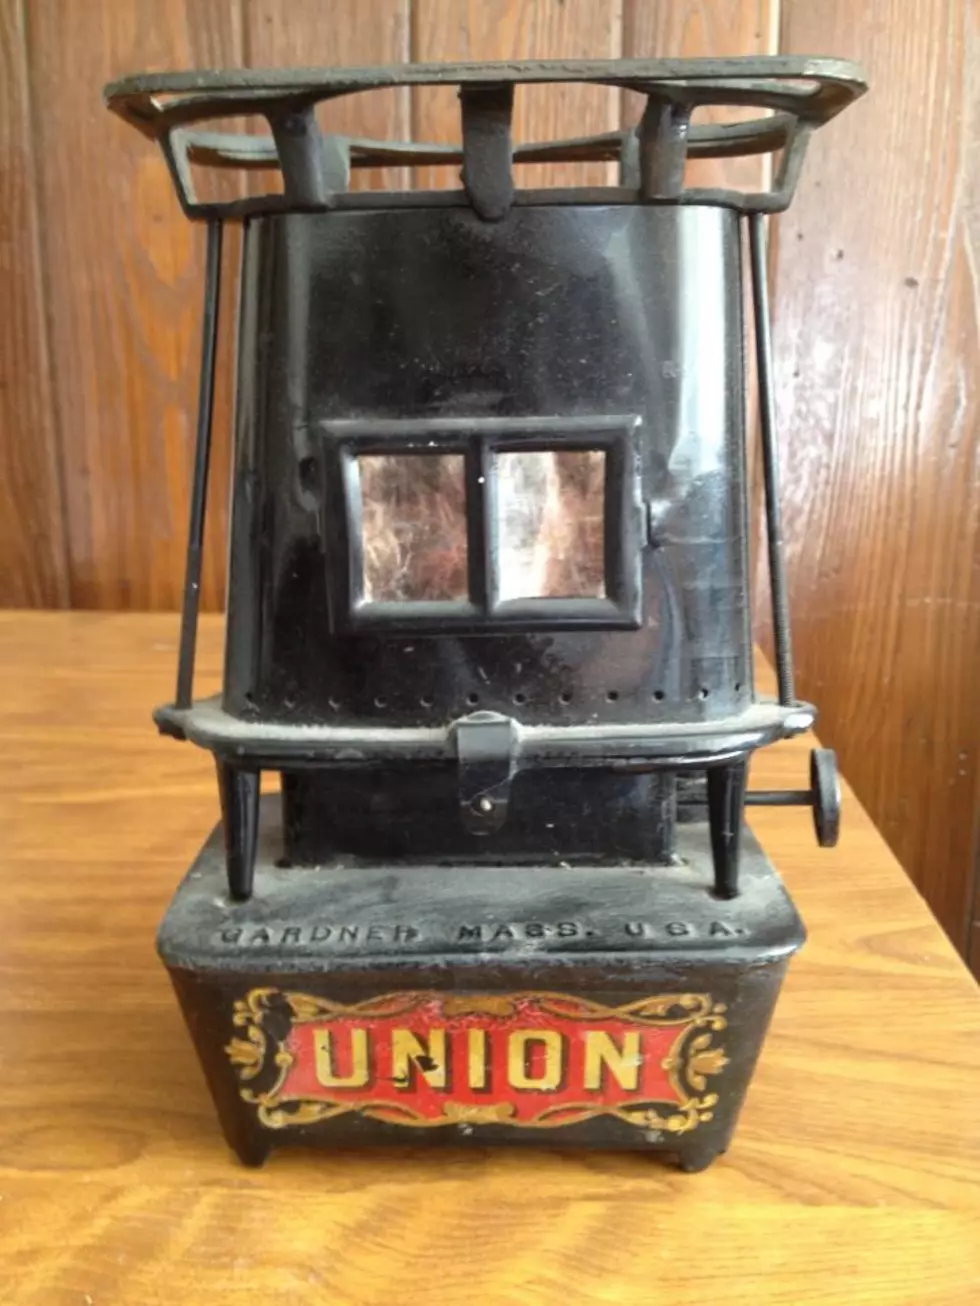 Have You Ever Seen an Antique Sad Iron Heater Stove?